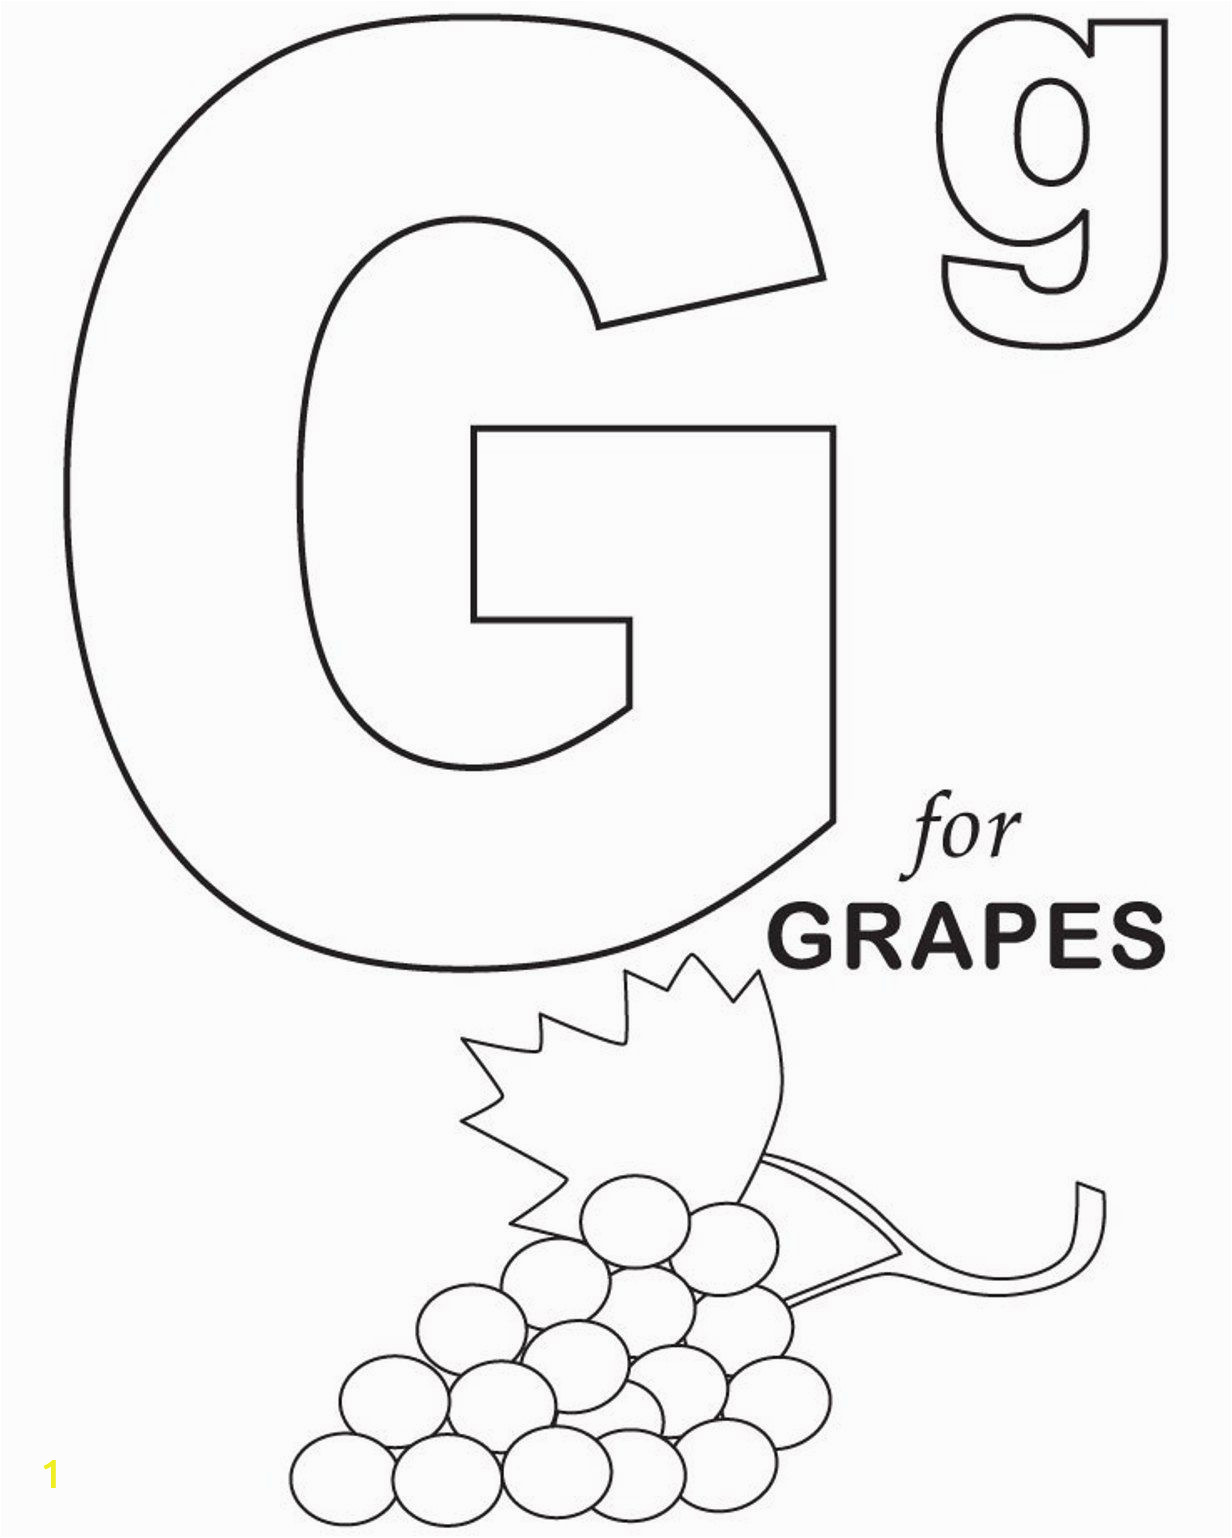 Alphabet Coloring for Grade 1 Grapes Fruit Coloring Pages Alphabet with Images